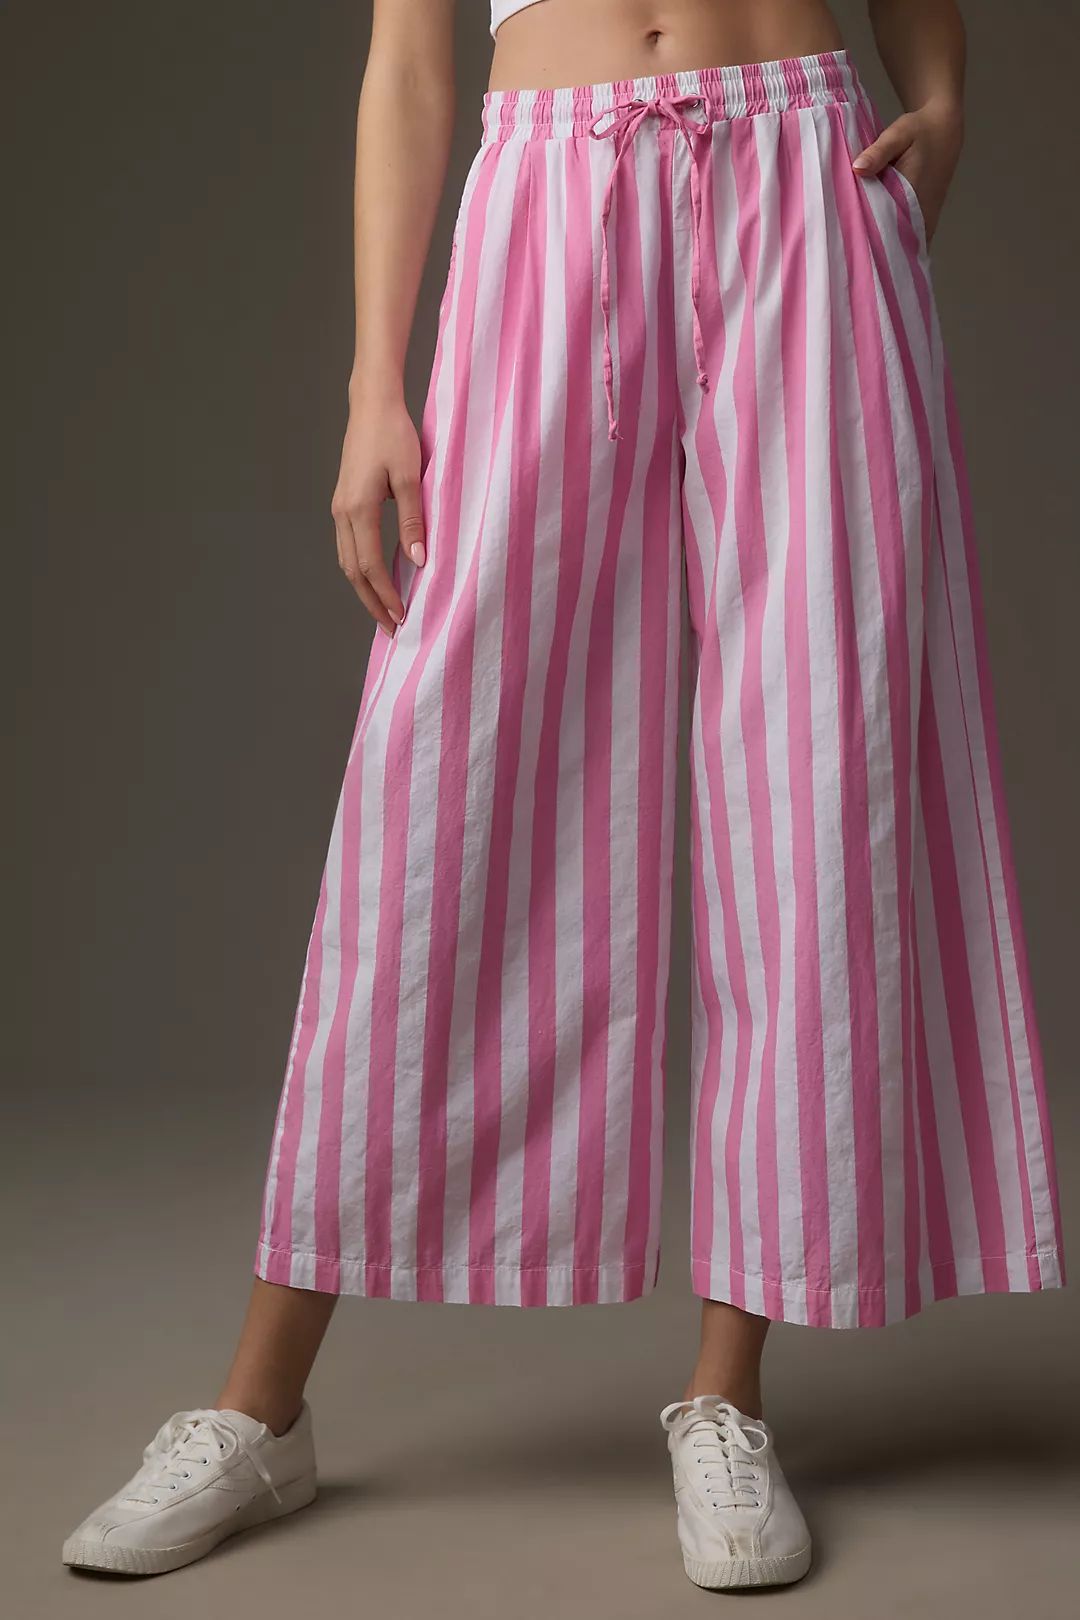 Sundry Candy Striped Wide-Leg Pants | Anthropologie (US)